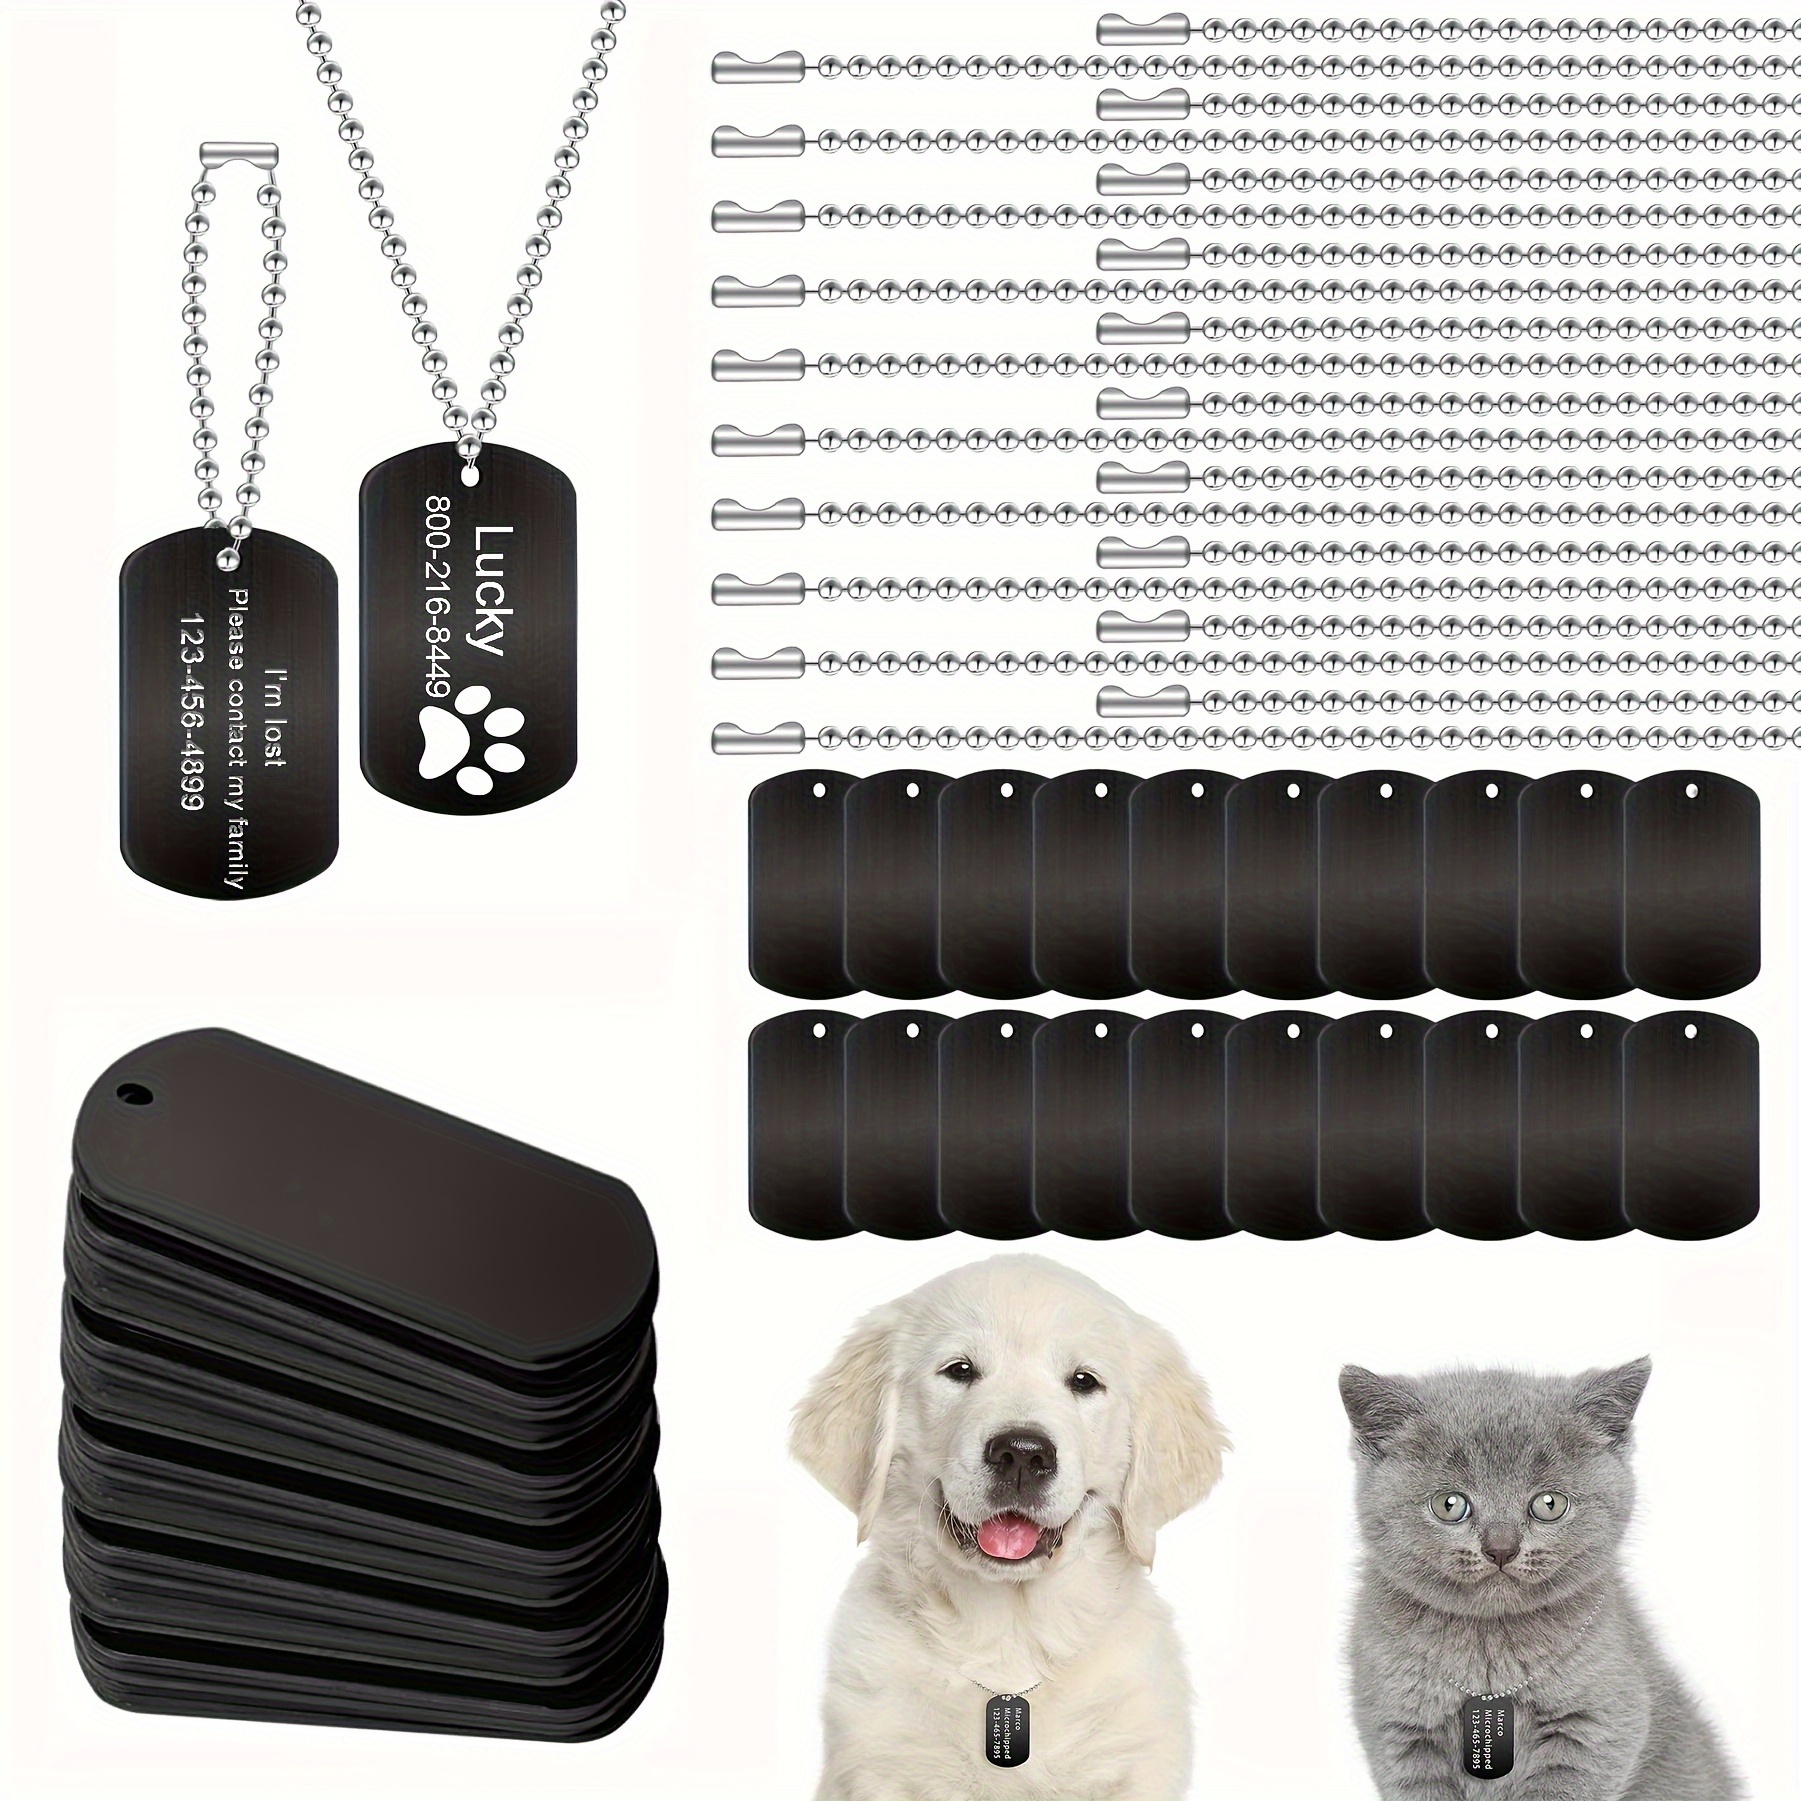 

40pcs Dog Tags Set, Including 20 Pcs Aluminum Blank Dog Tags, 20 Pcs Ball Steel Chain Rectangle Blank Tag, Metal Stamping Tags For Diy Decorative Craft Pet Tags